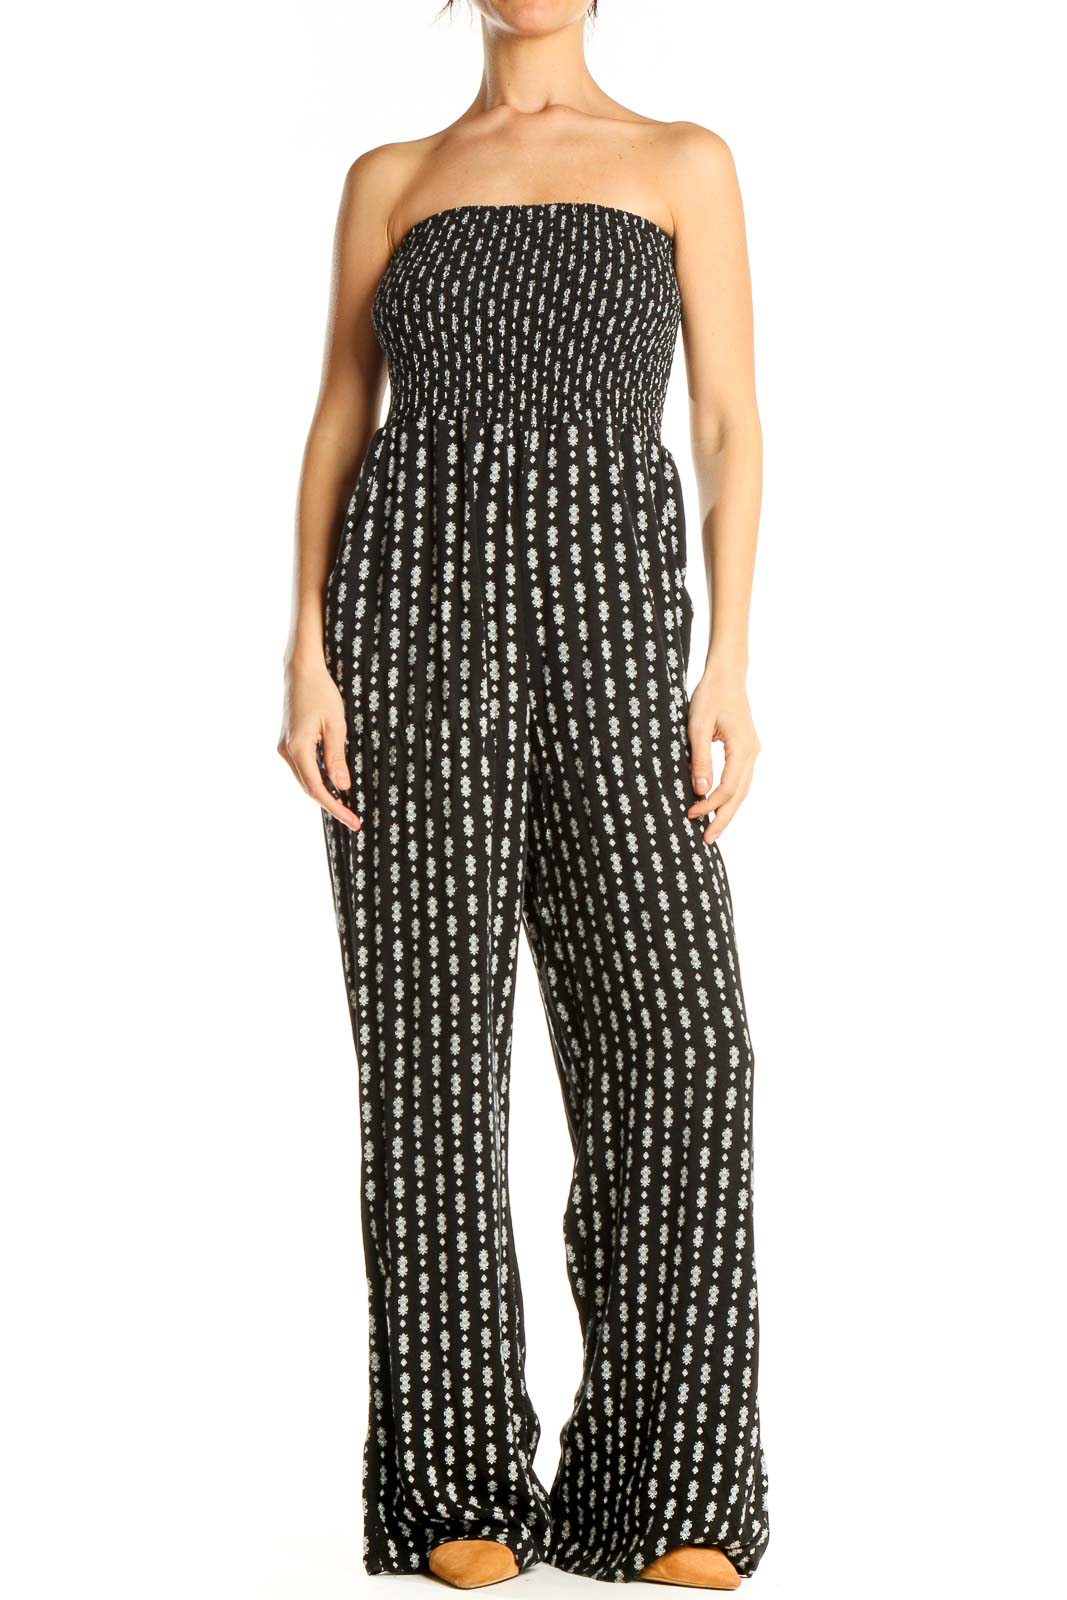 Black Printed Strapless Jumpsuit Front